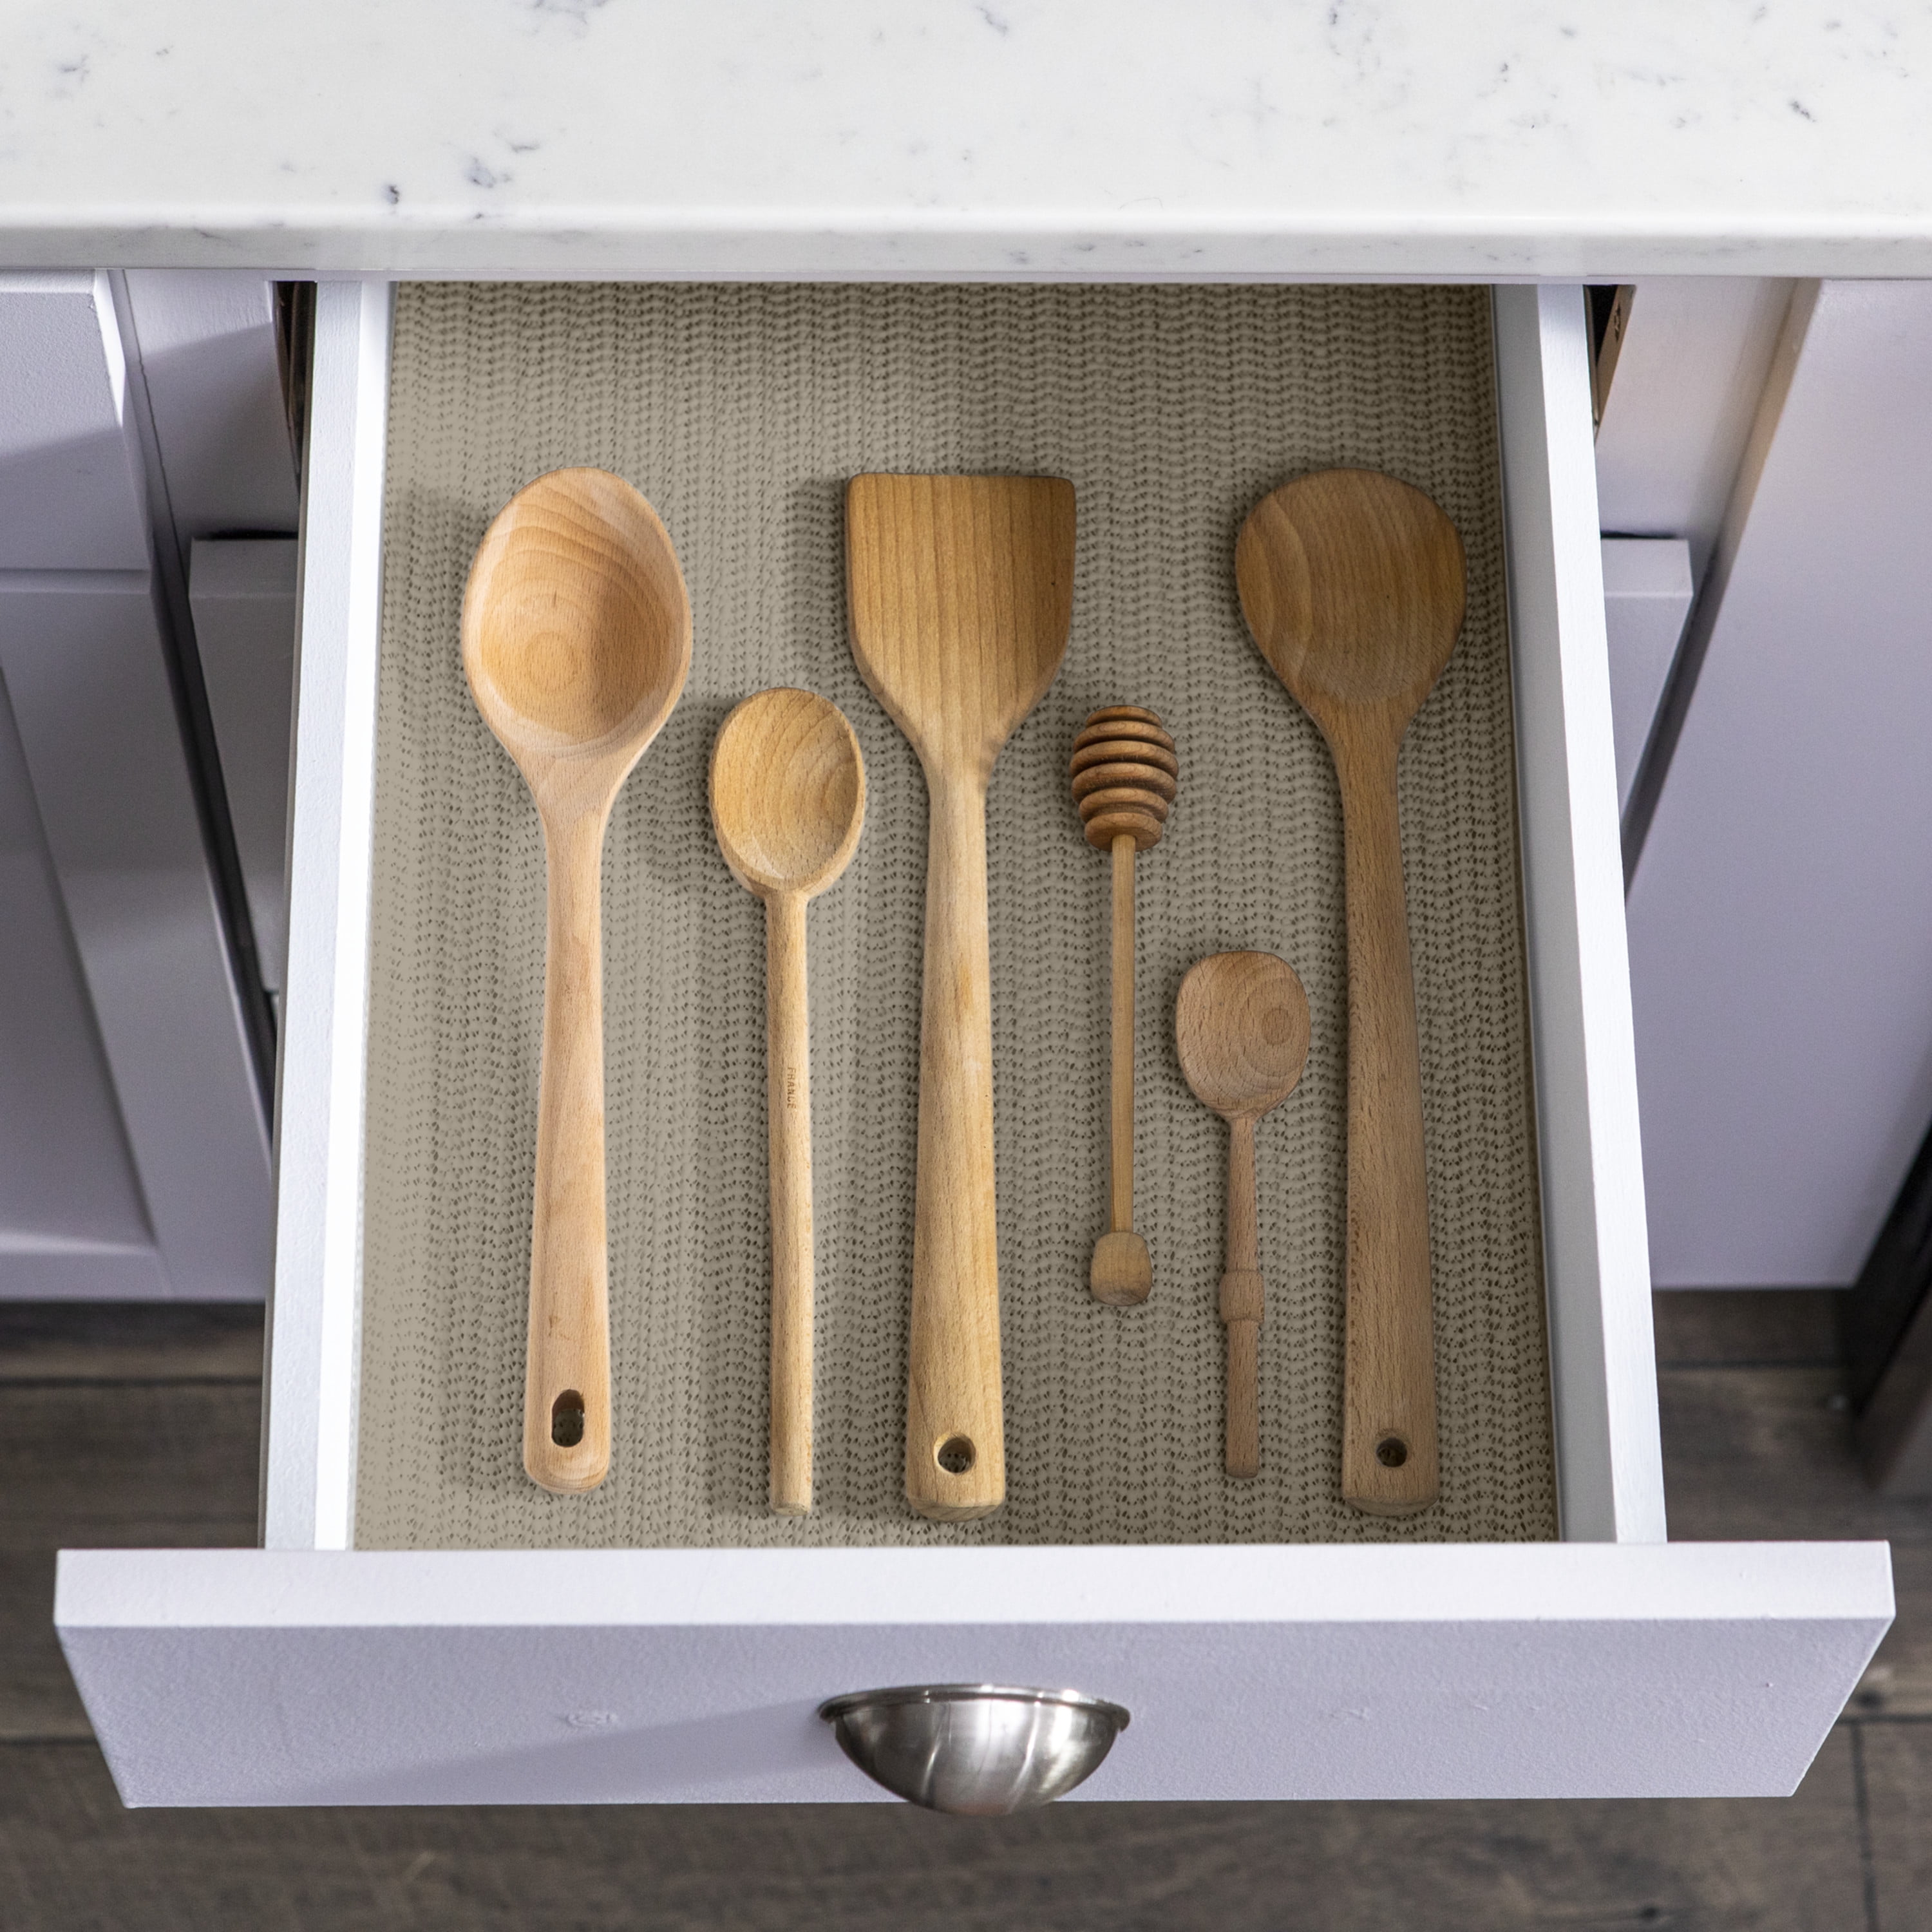 The Best Shelf Liners For Protecting Your Cabinets And Drawers